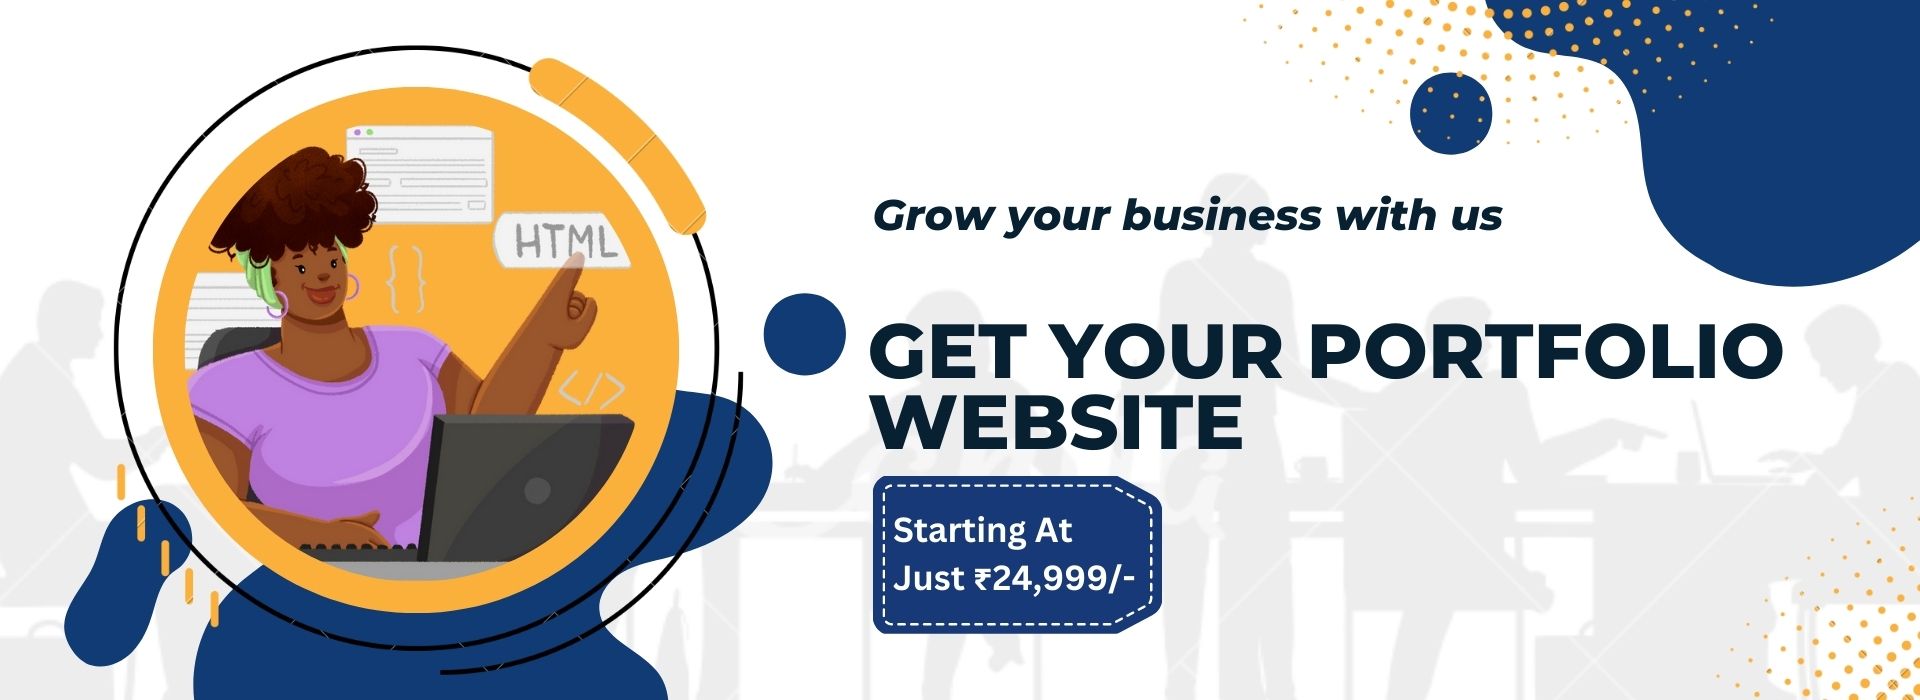 Get your portfolio website and grow your business with us.